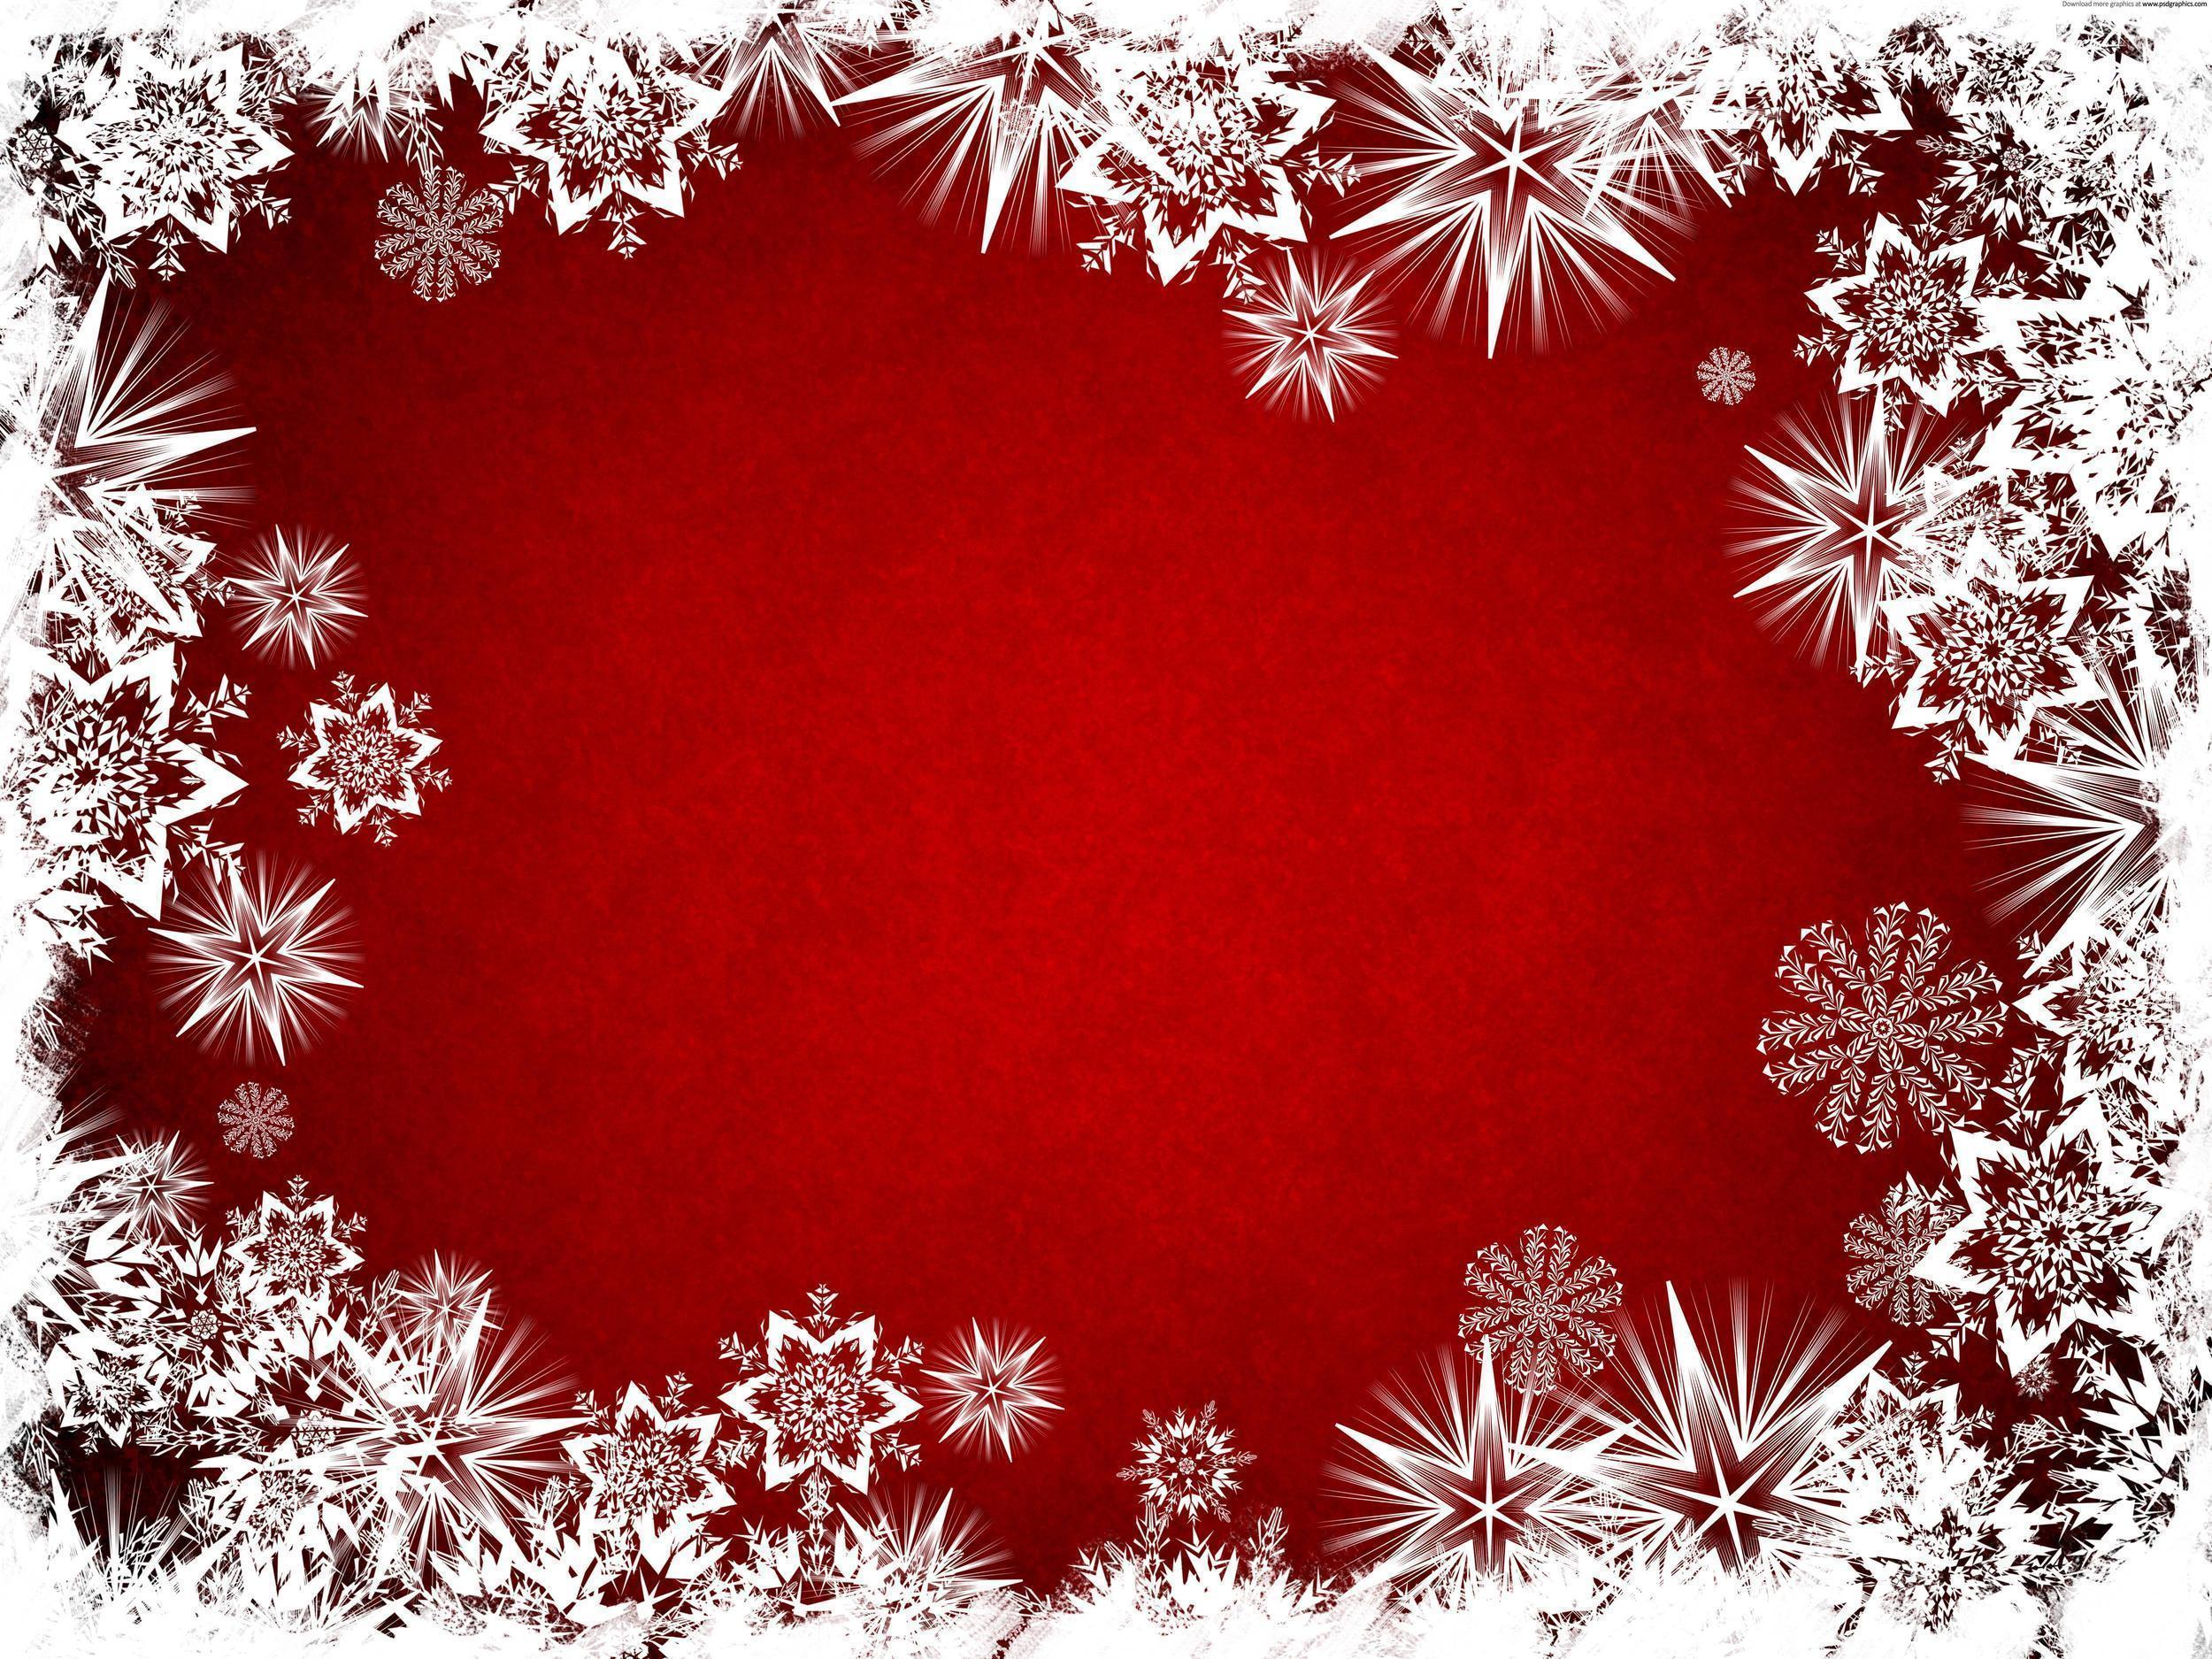 White stars on a red background on Christmas wallpaper and image